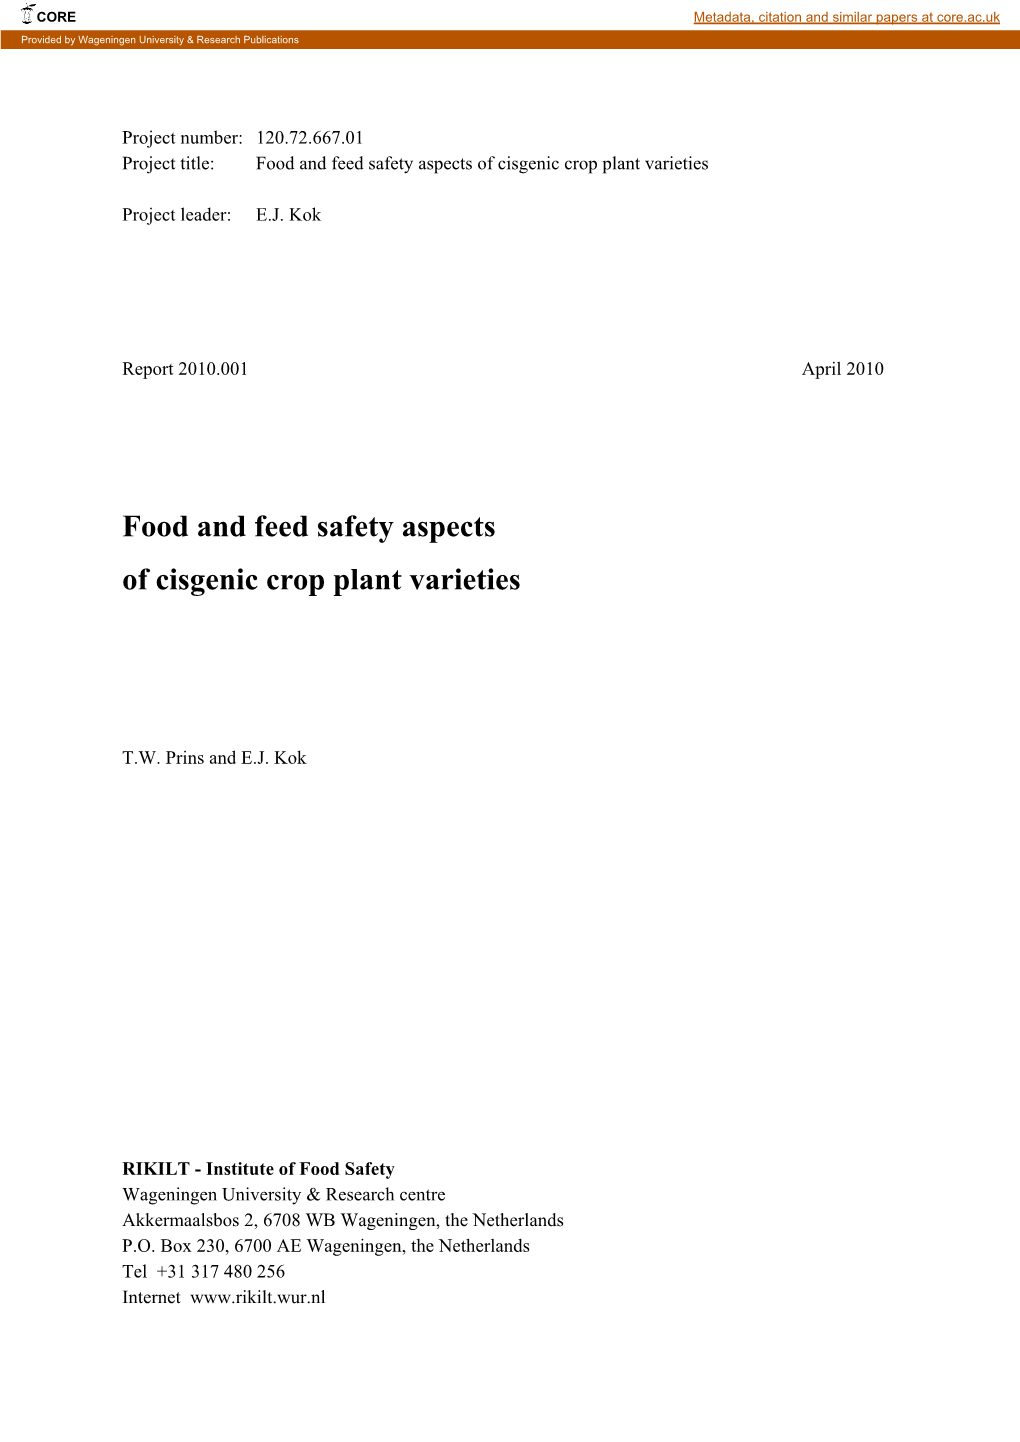 Food and Feed Safety Aspects of Cisgenic Crop Plant Varieties